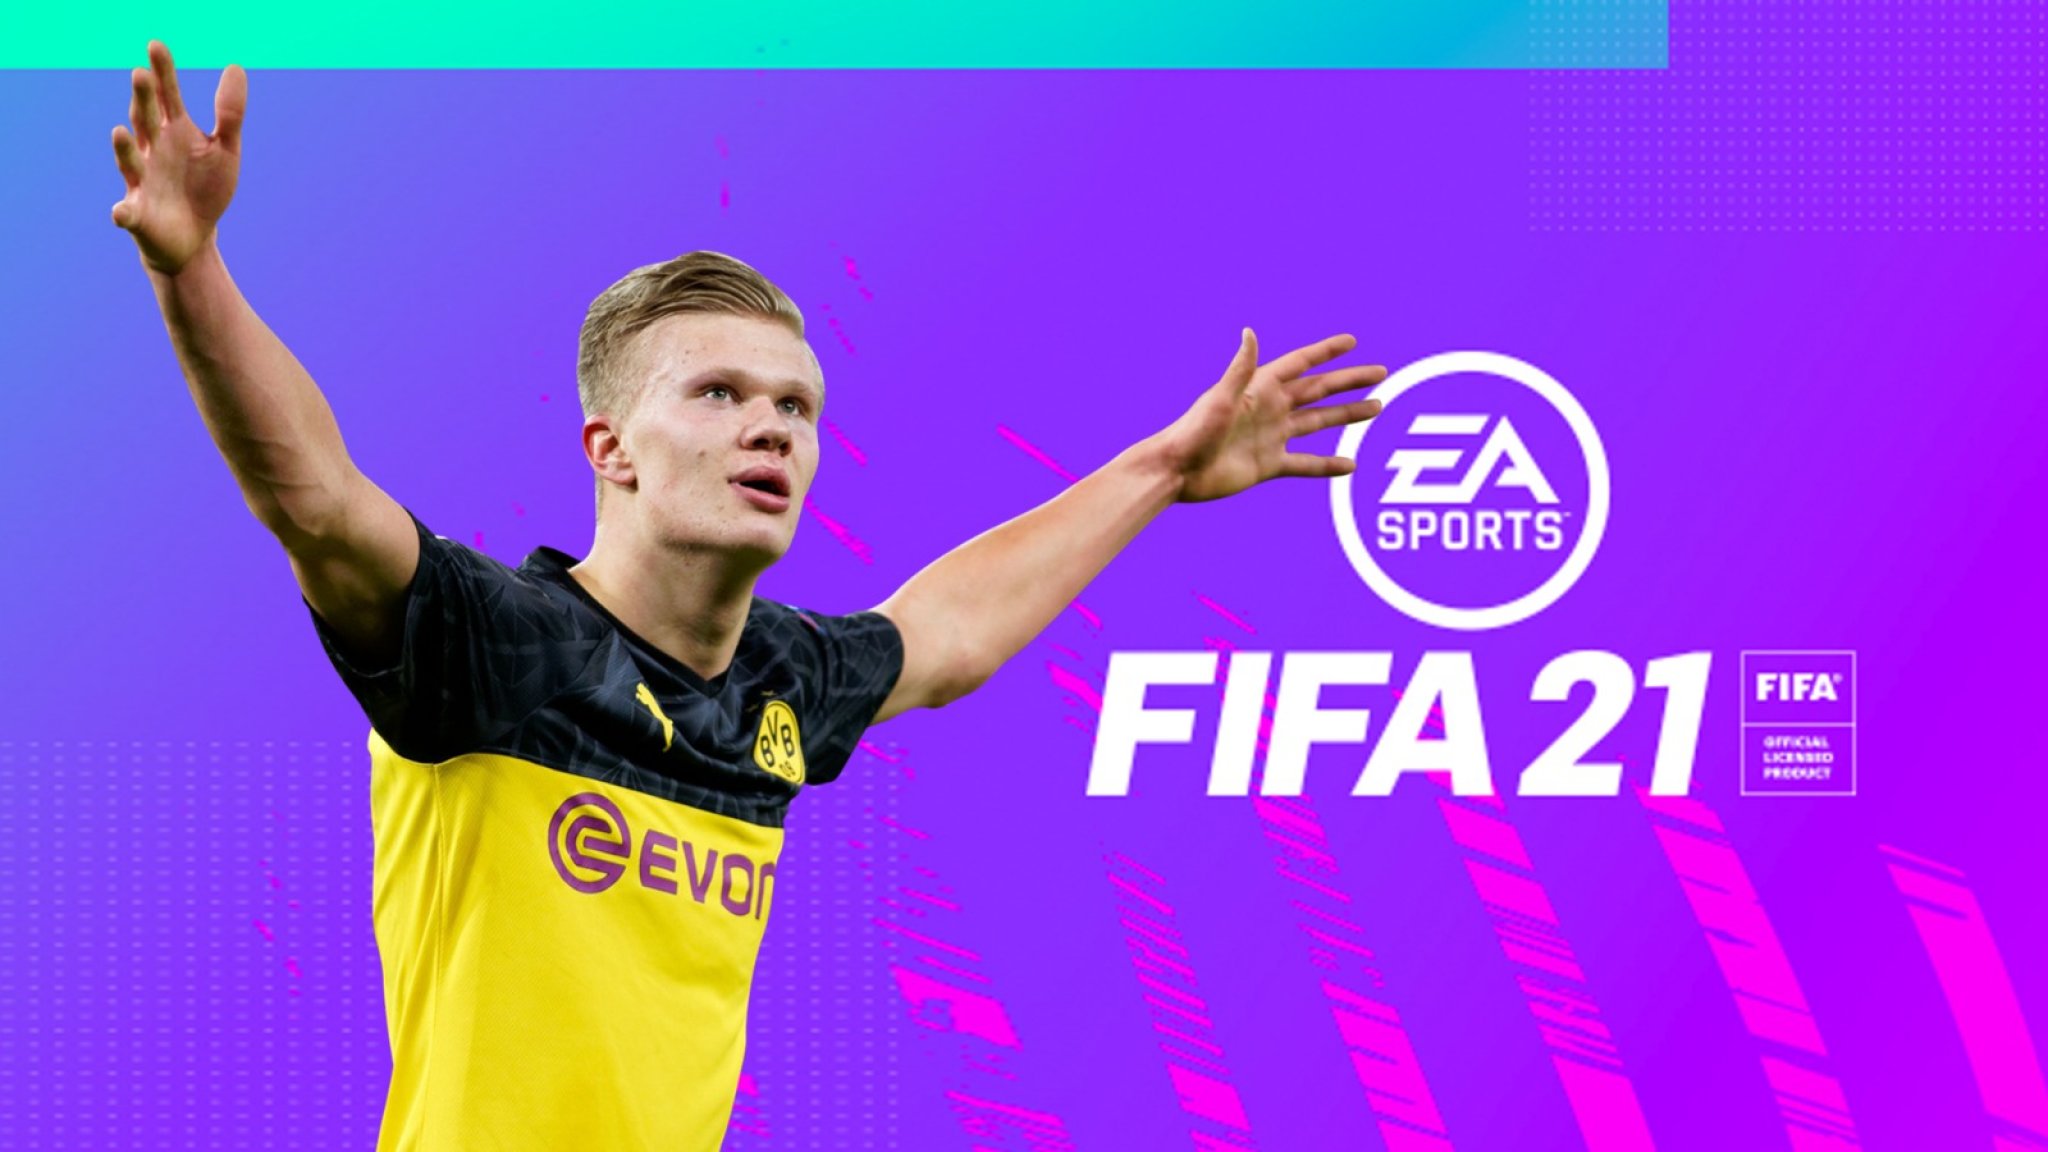 FIFA 21 - Connections Between Players